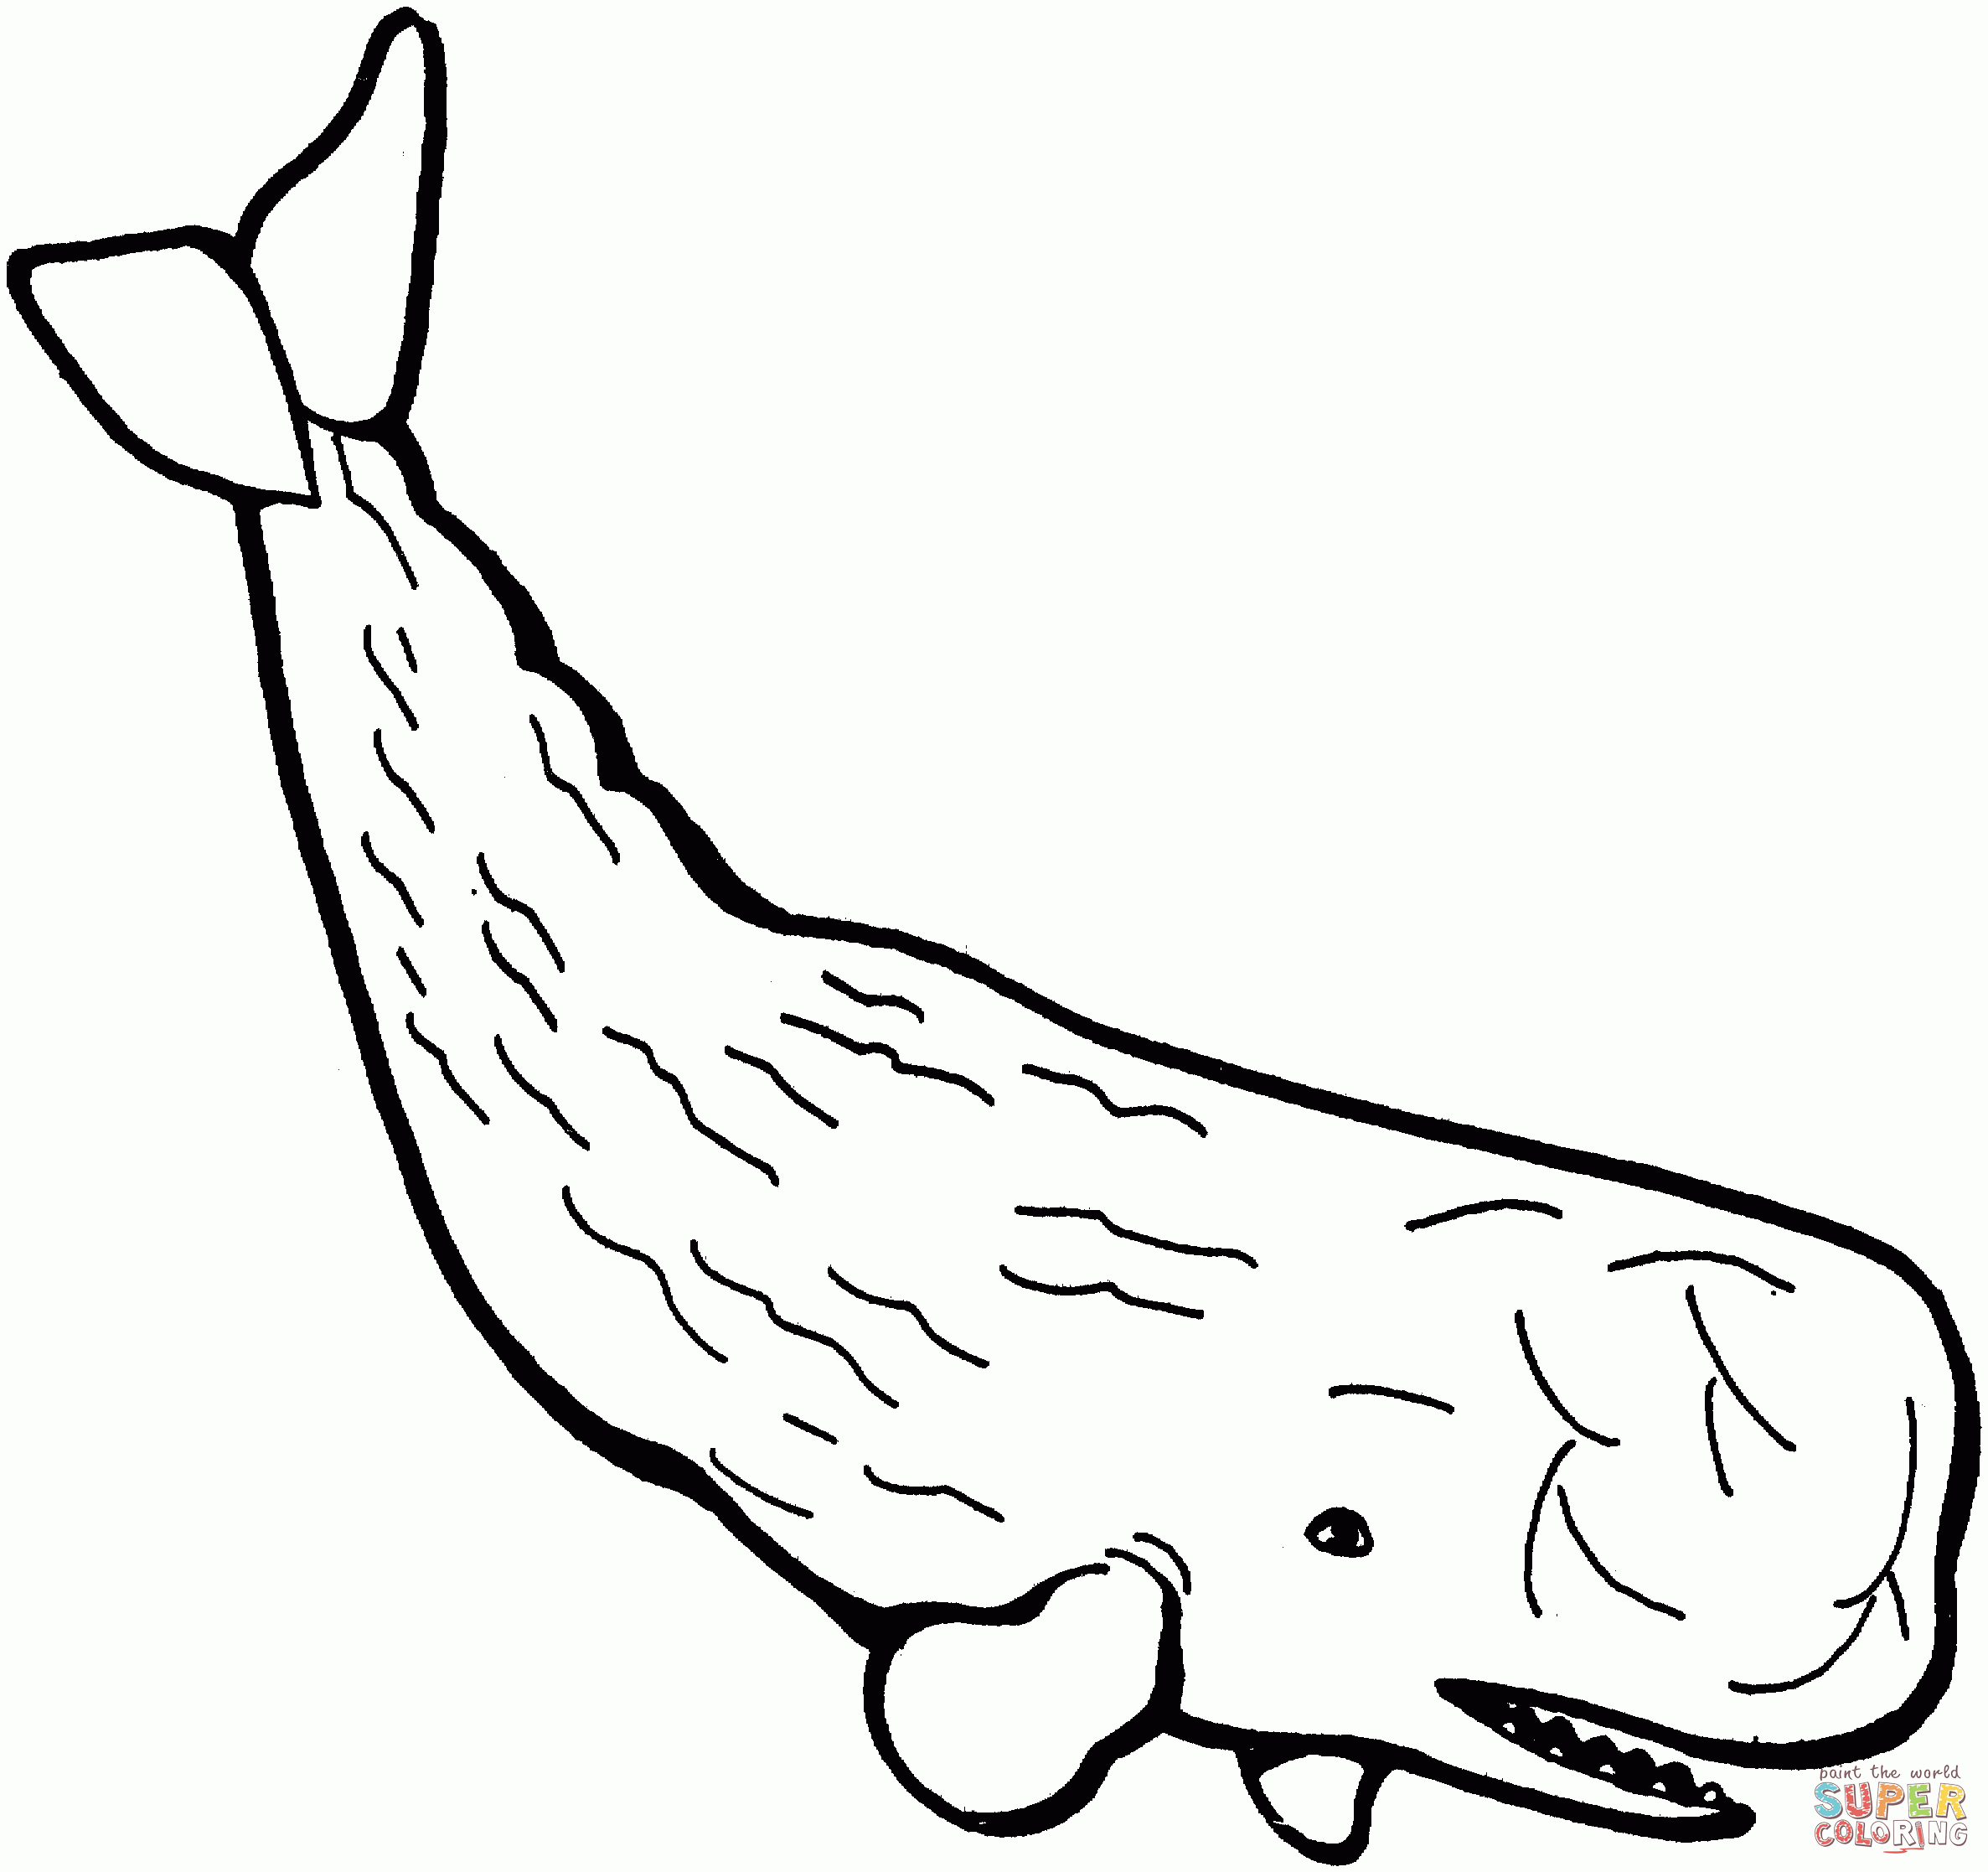 Sperm Whale Coloring Page | Free Printable Coloring Pages - Free Printable Whale Template